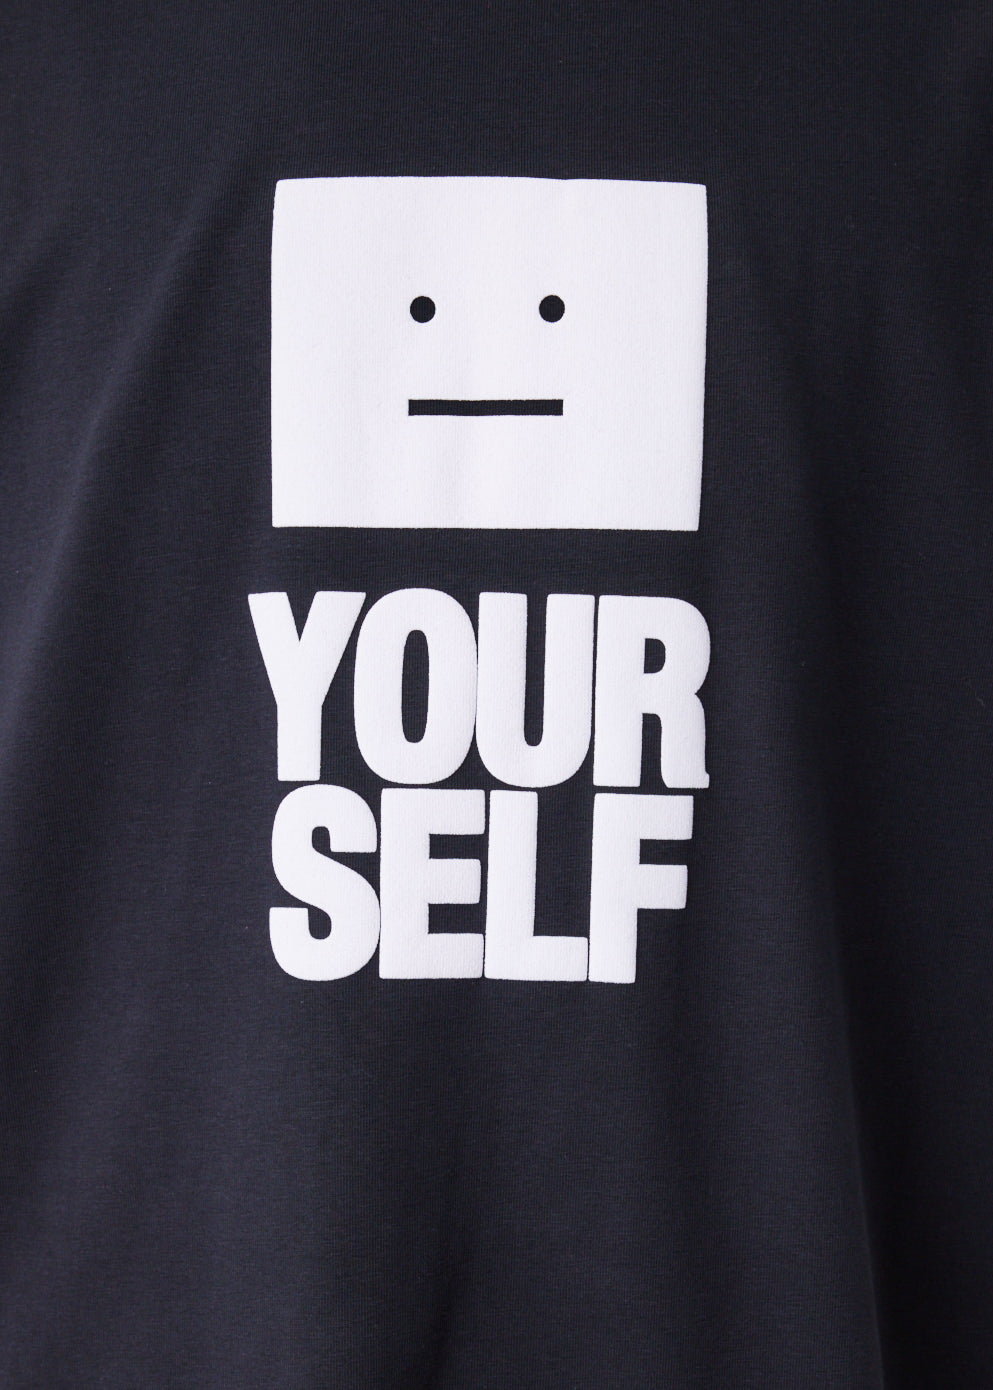 Face Yourself T-Shirt